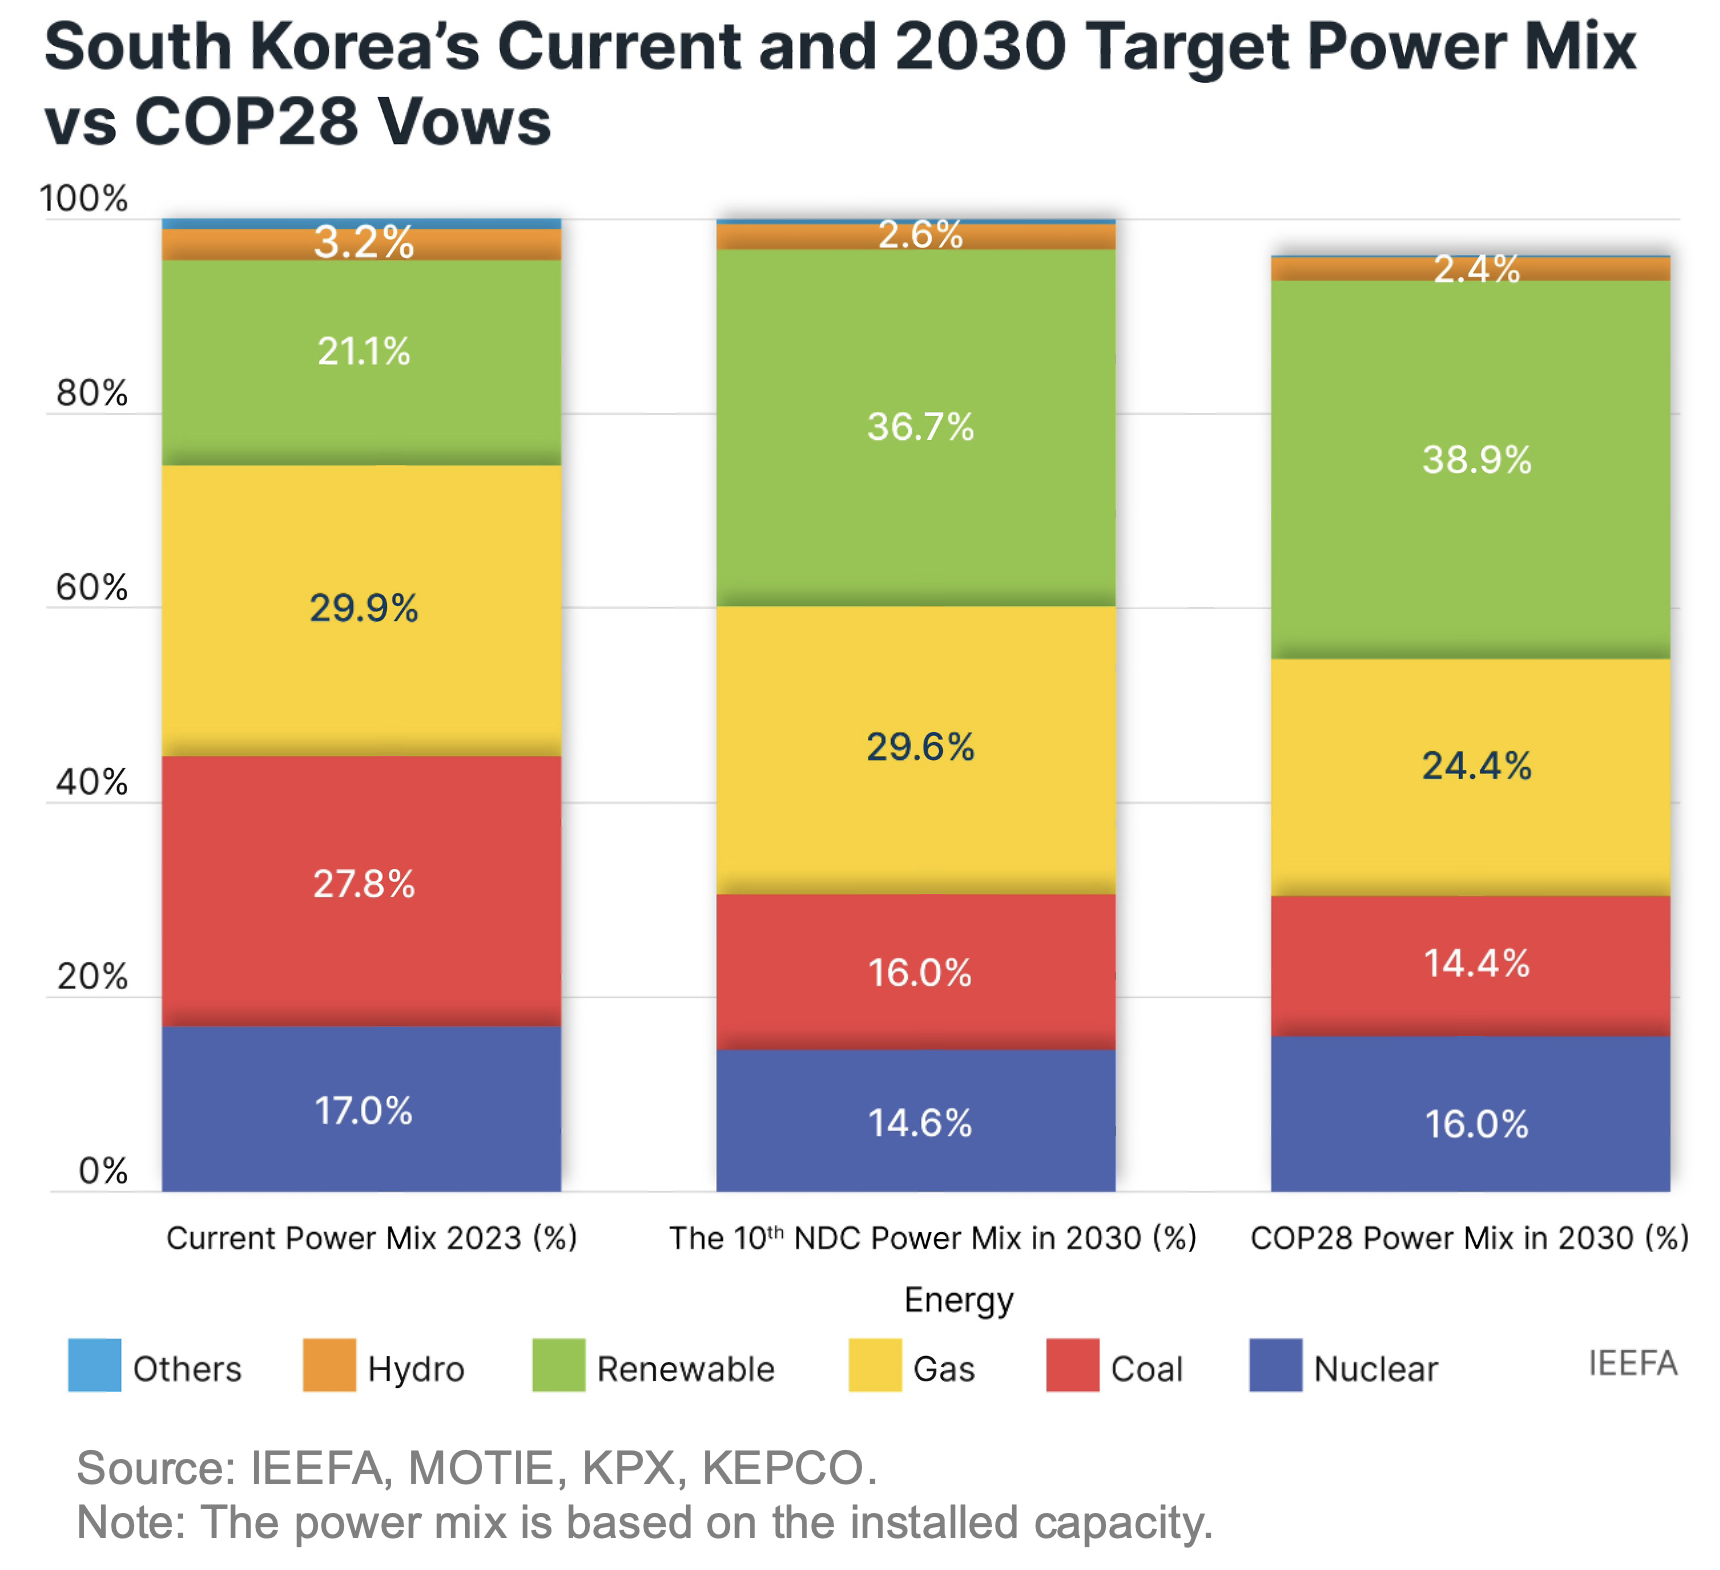 South Korea’s Current and 2030 Target Power Mix vs COP28 Vows